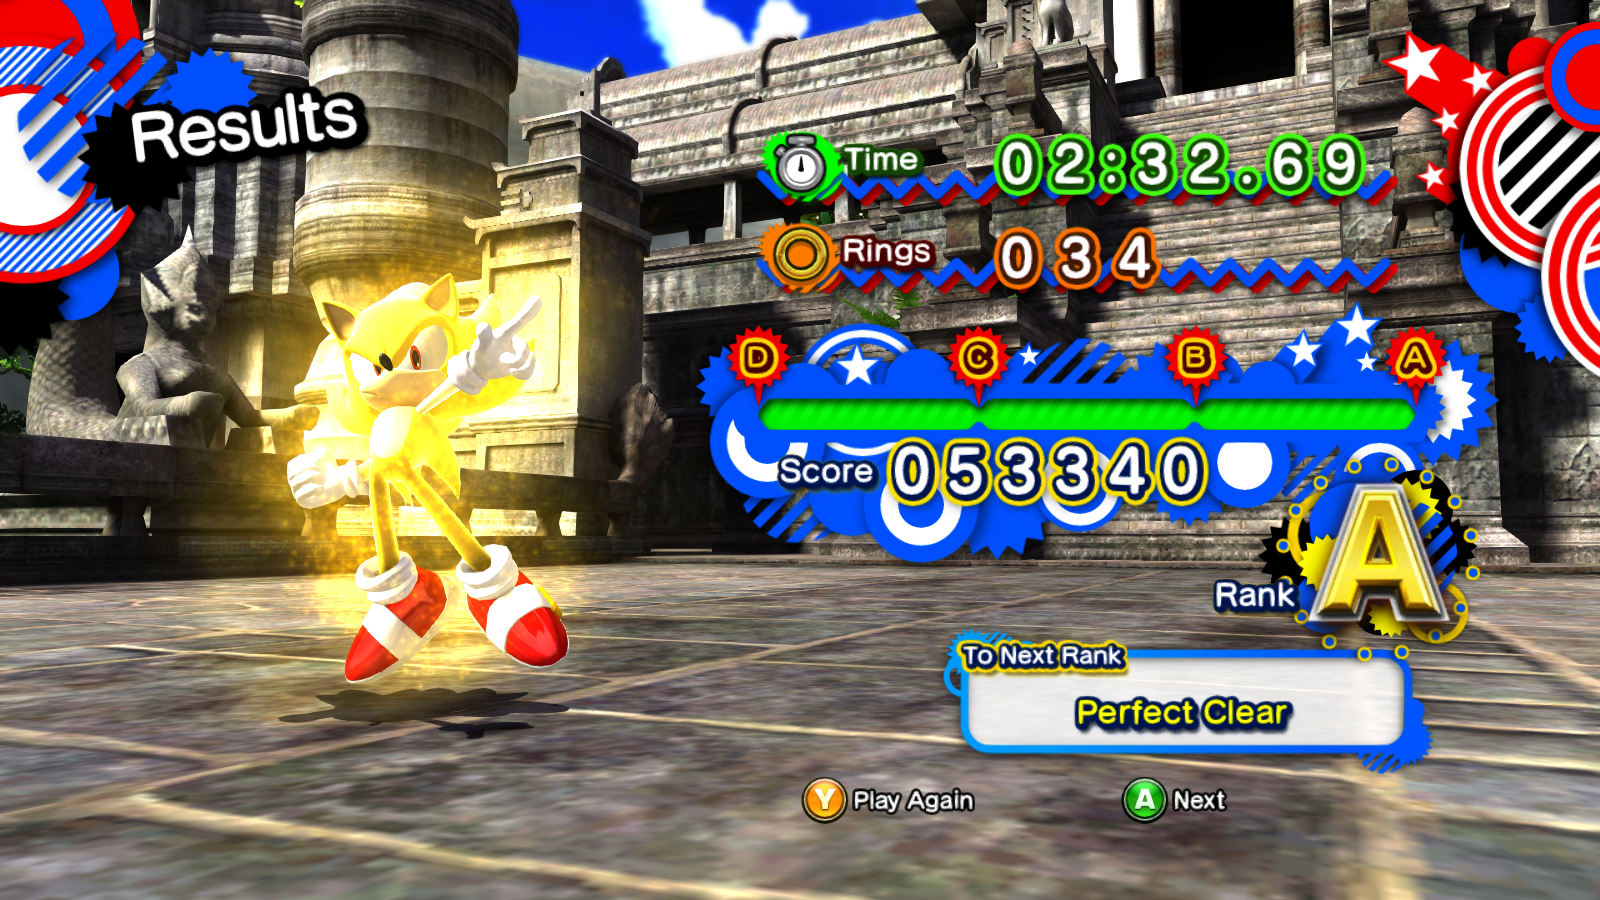 Some More Screens Image Sonic Generations Unleashed Project Mod For Sonic Generations Mod Db